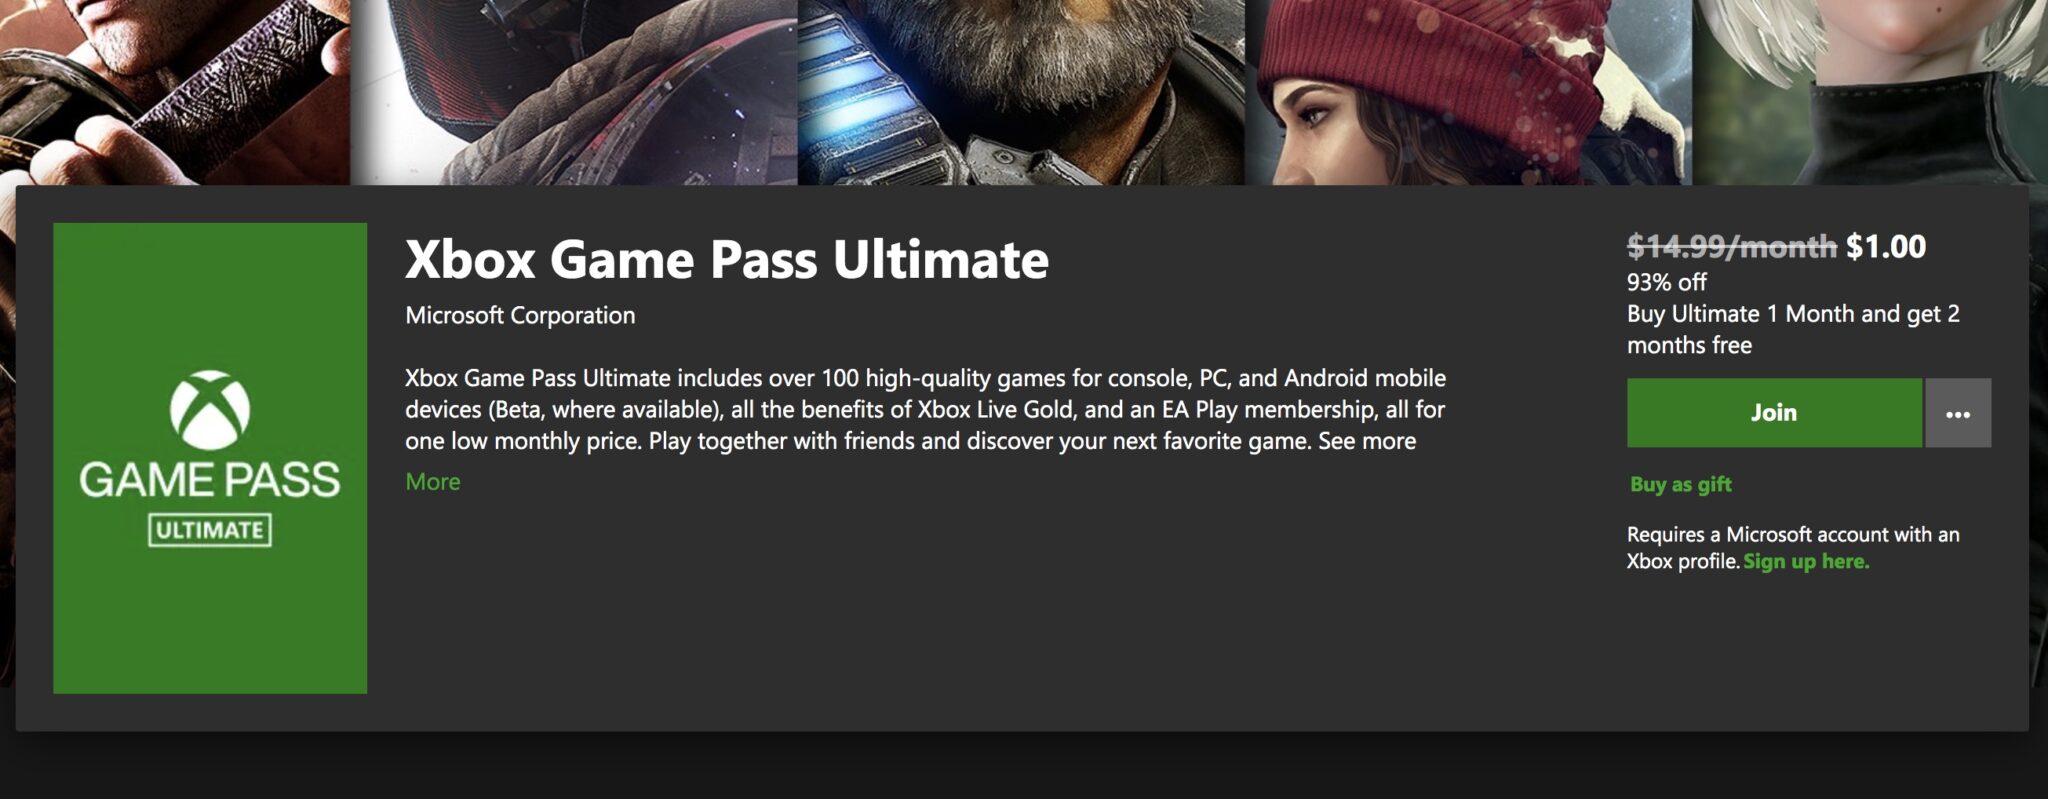 xbox ultimate game pass deal $1